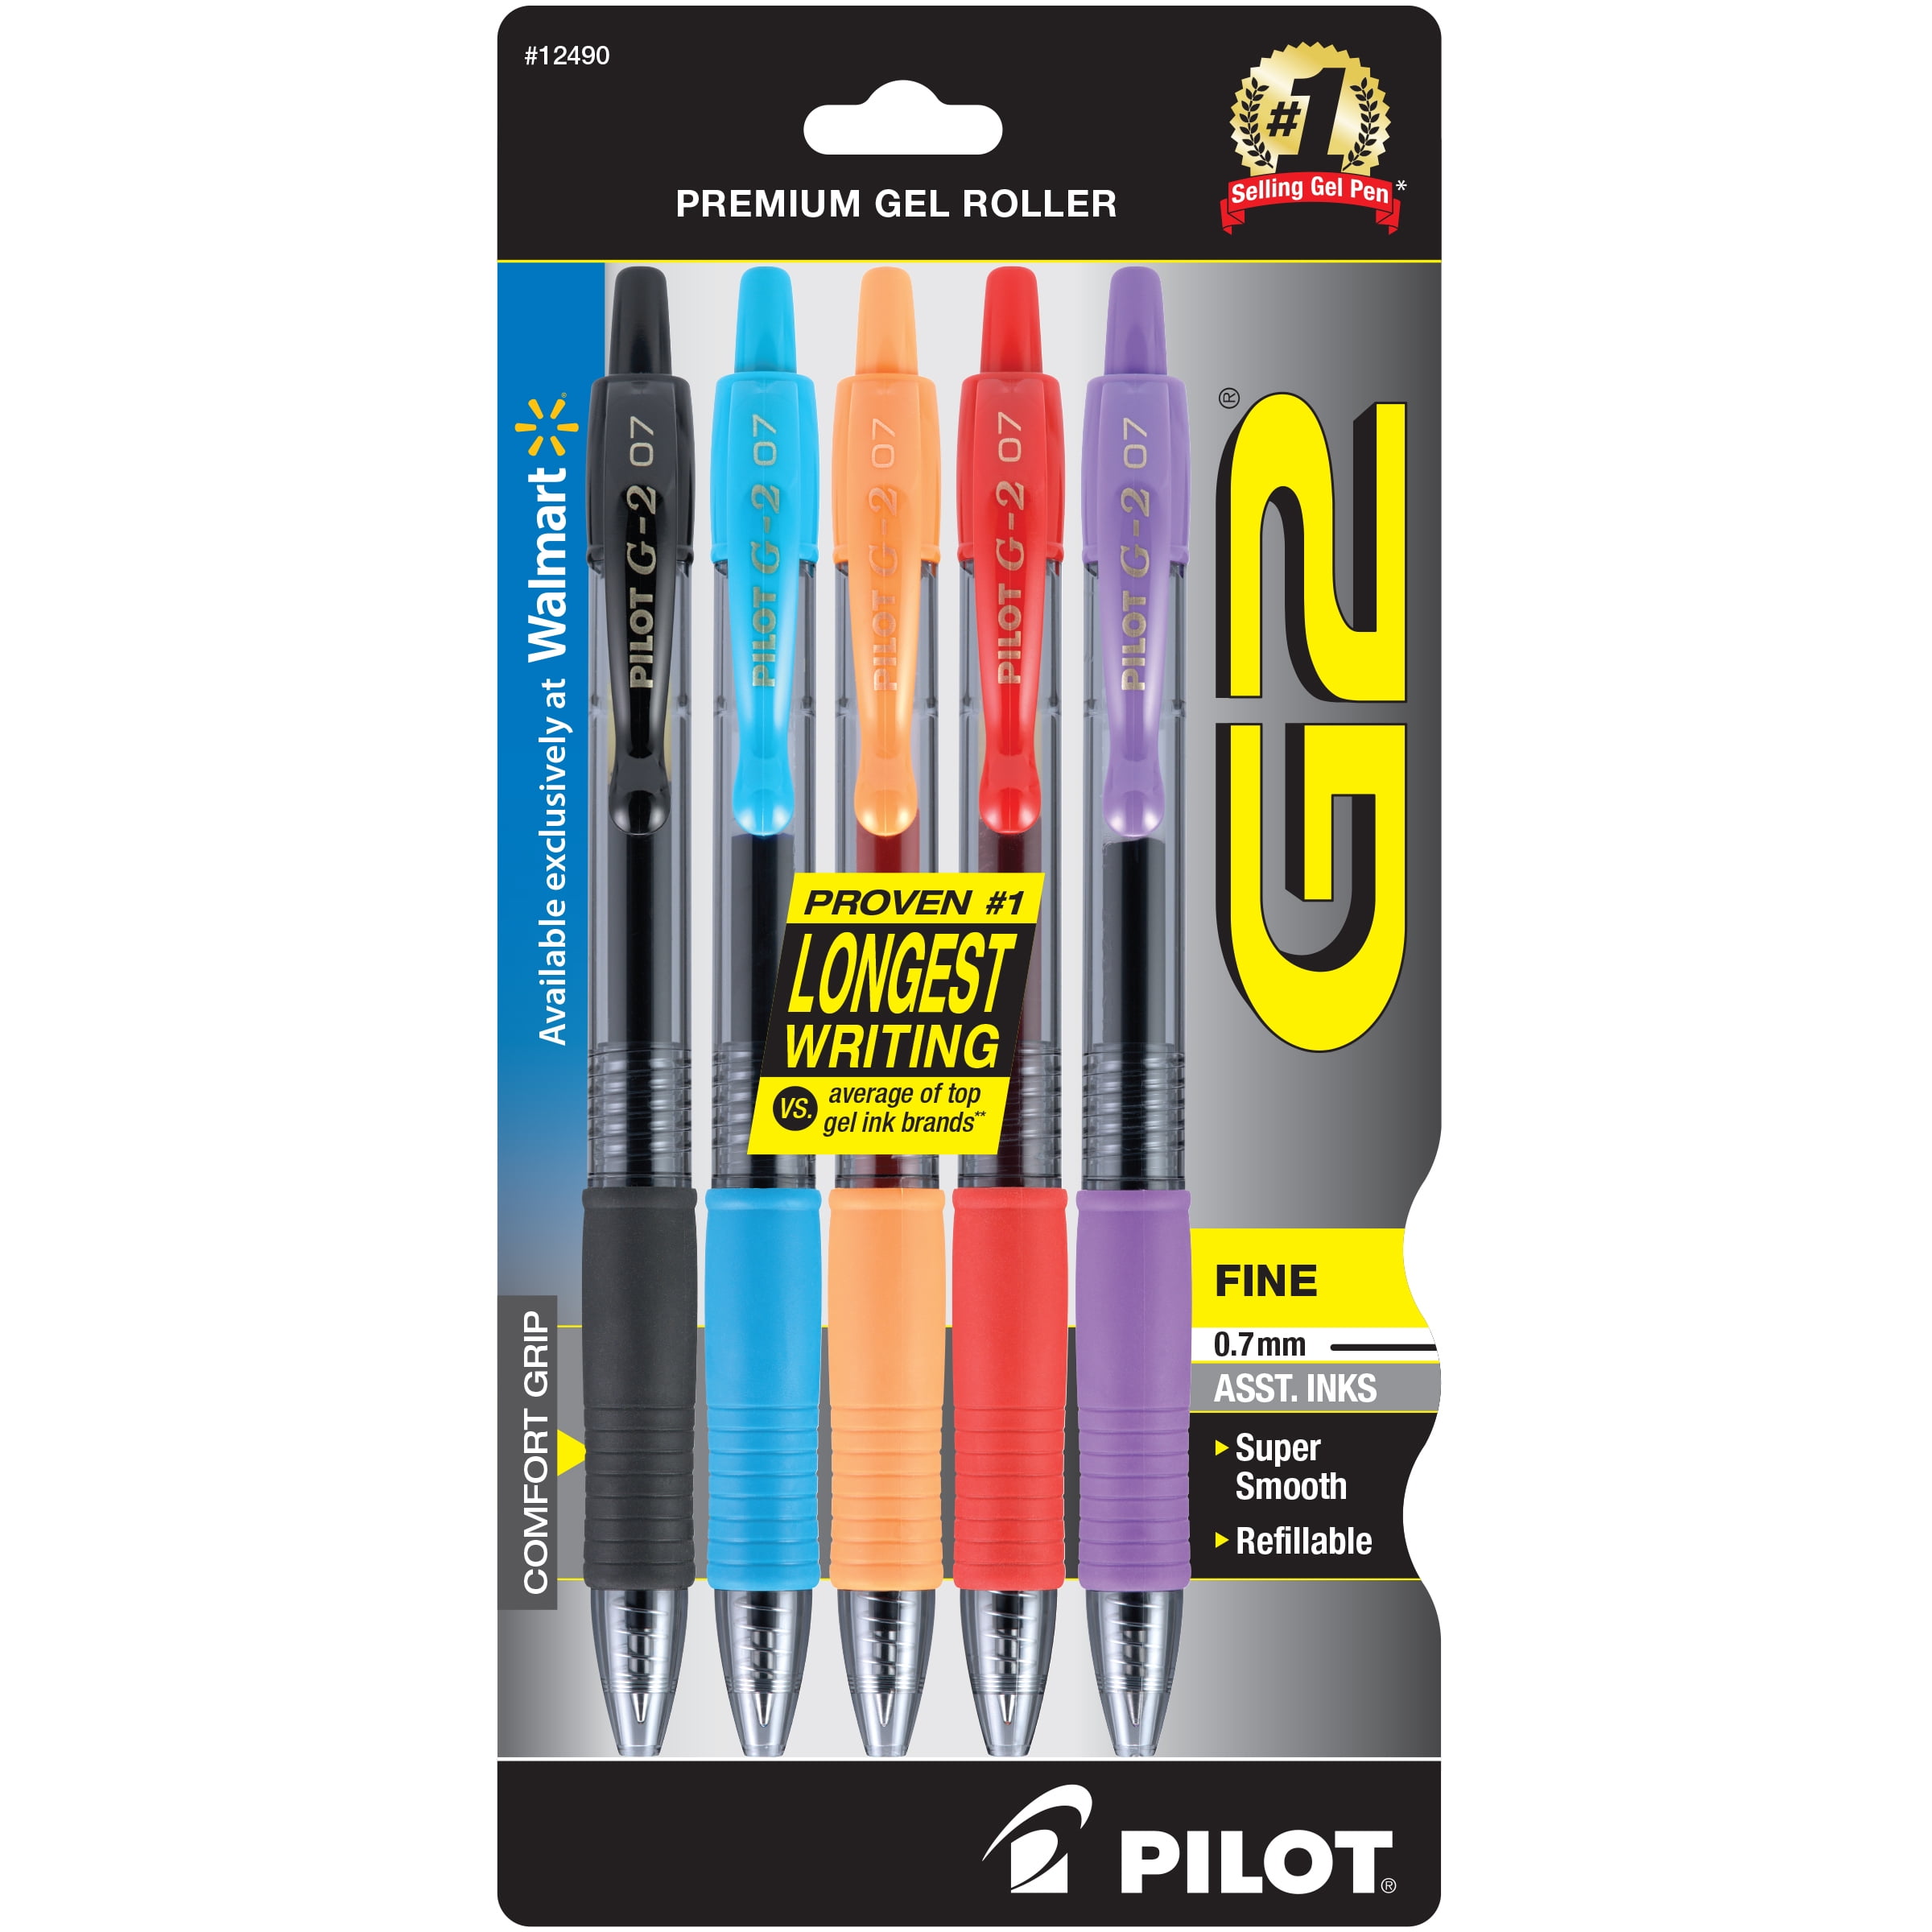 2 Pack of 8 PILOT G2 Premium Refillable & Retractable Rolling Ball Gel Pens Assorted Color Inks, Fine Point 31128